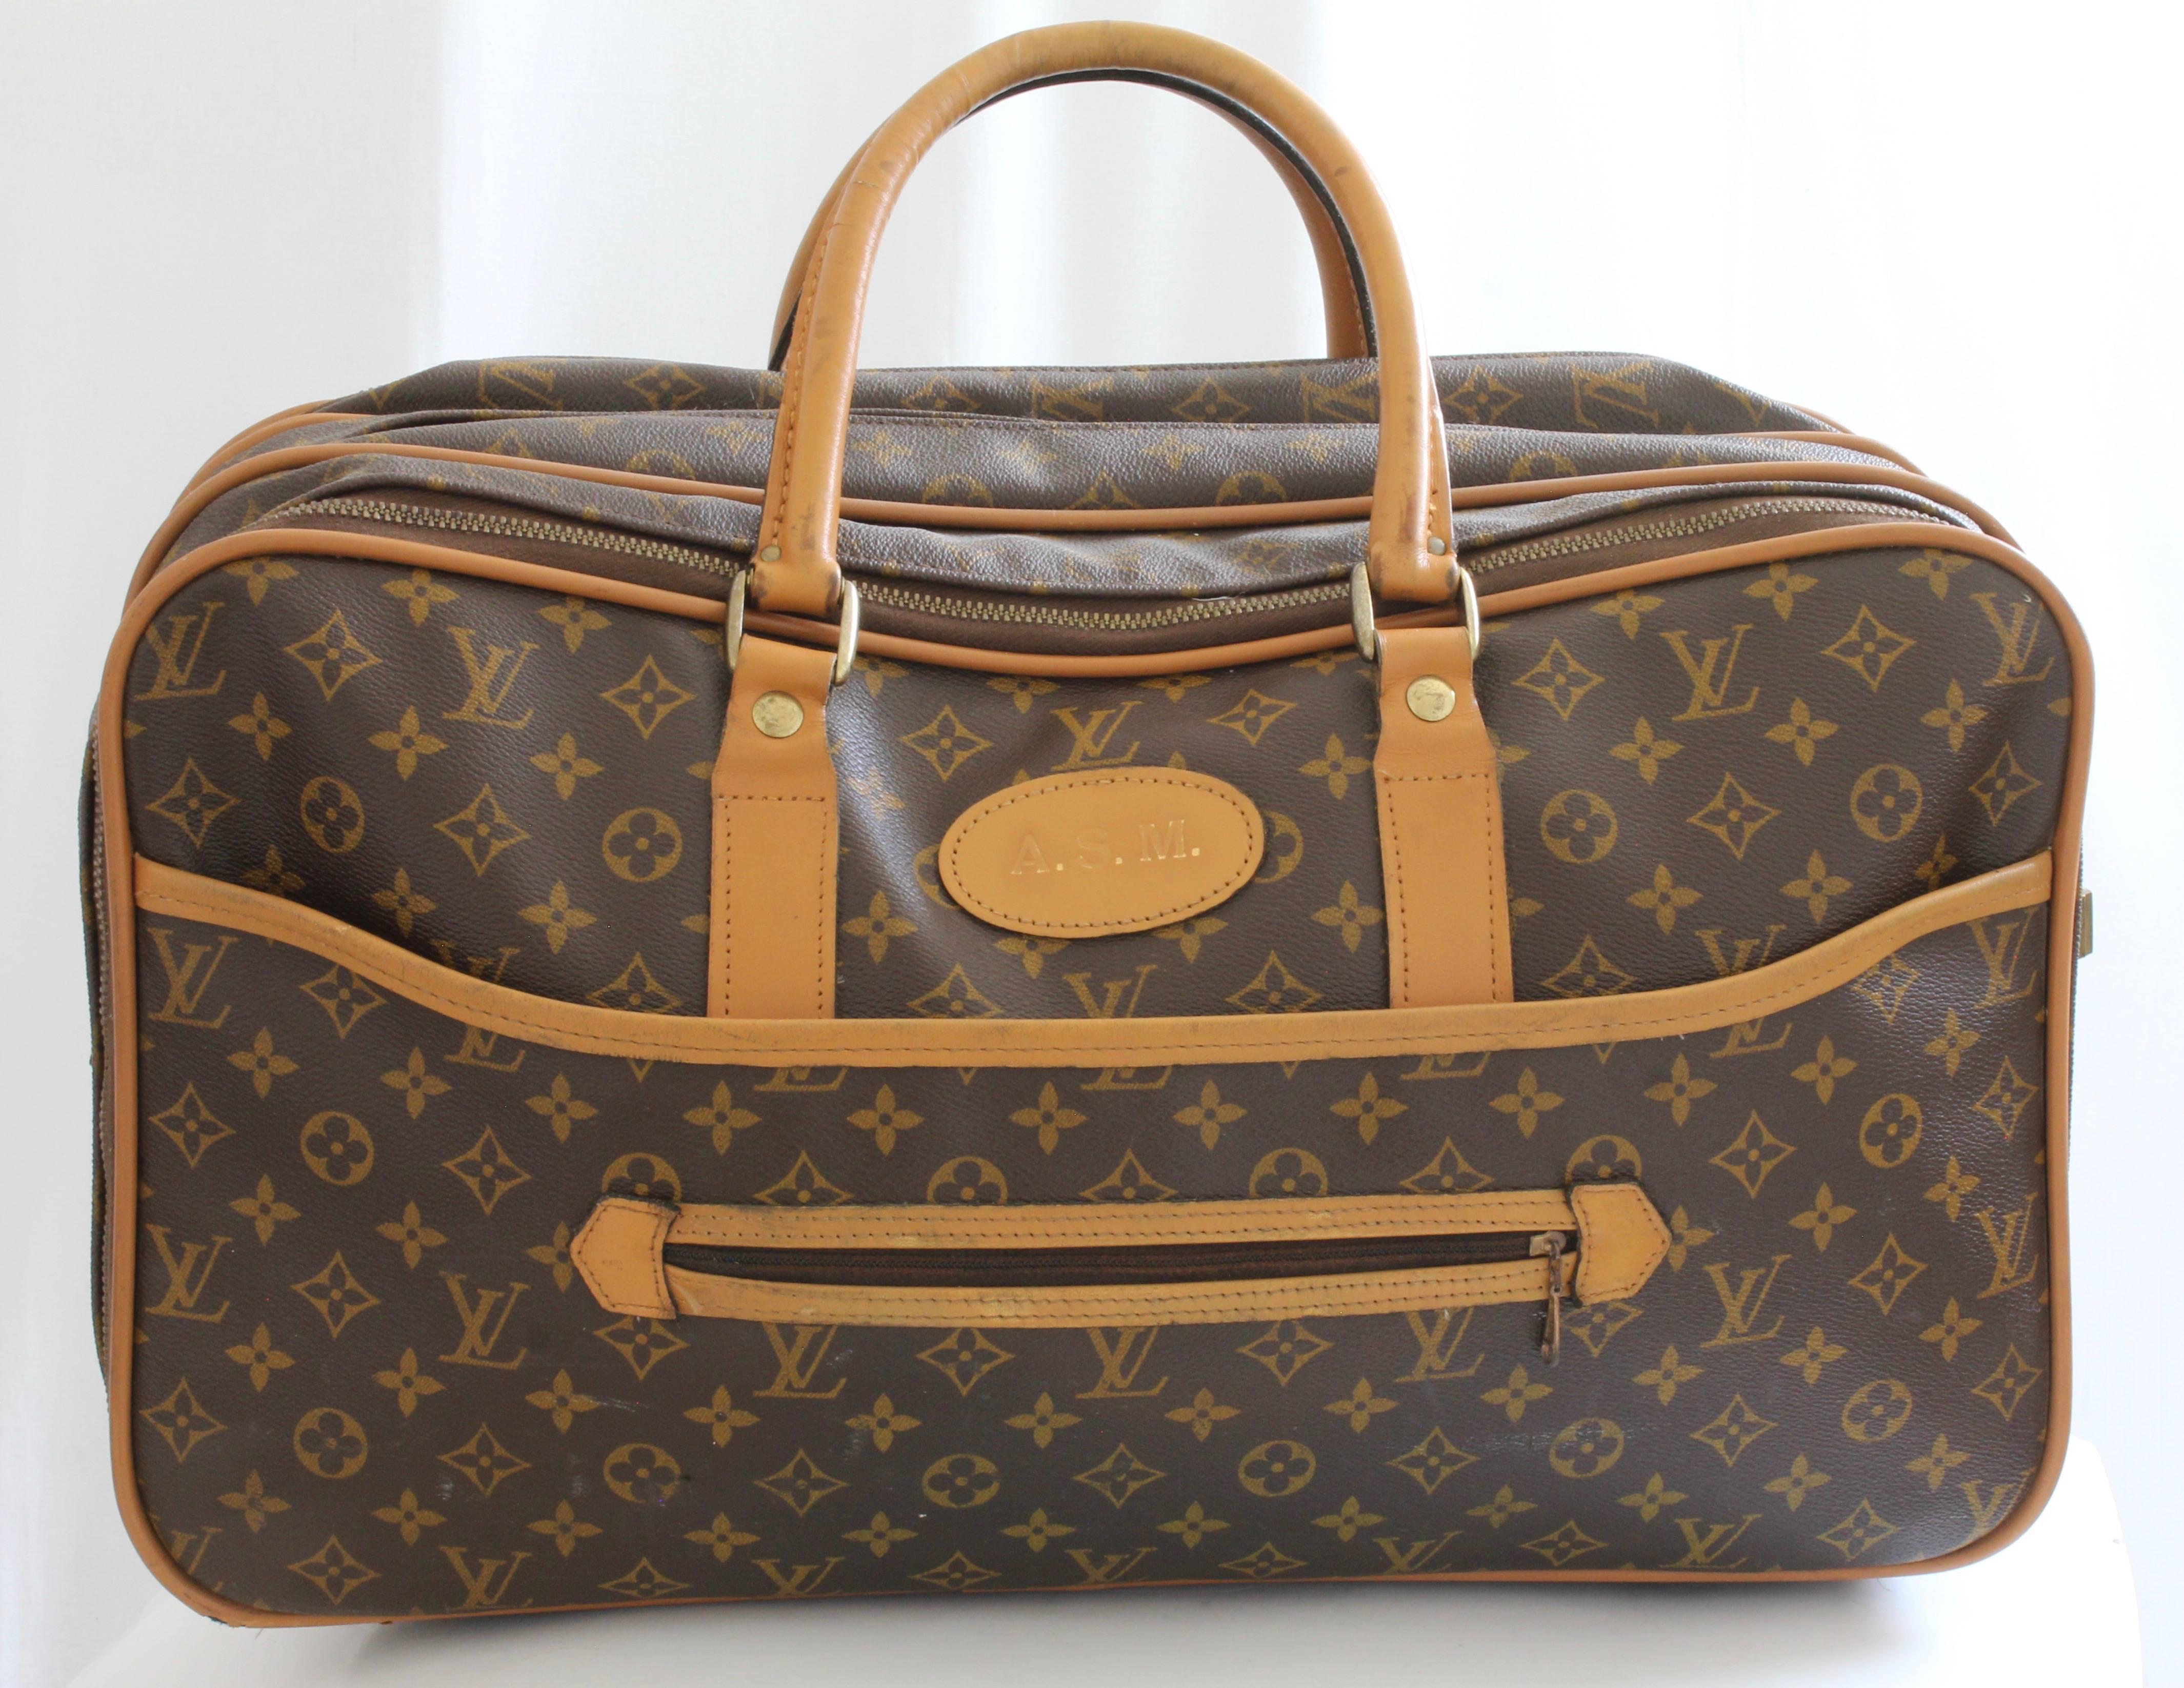 Here's a hard-to-find soft side suitcase or carry all was made in the 1970s by The French Company for Louis Vuitton and Saks Fifth Avenue.  Produced for only a short period, these incredible French Company pieces are so hard to find nowadays and are